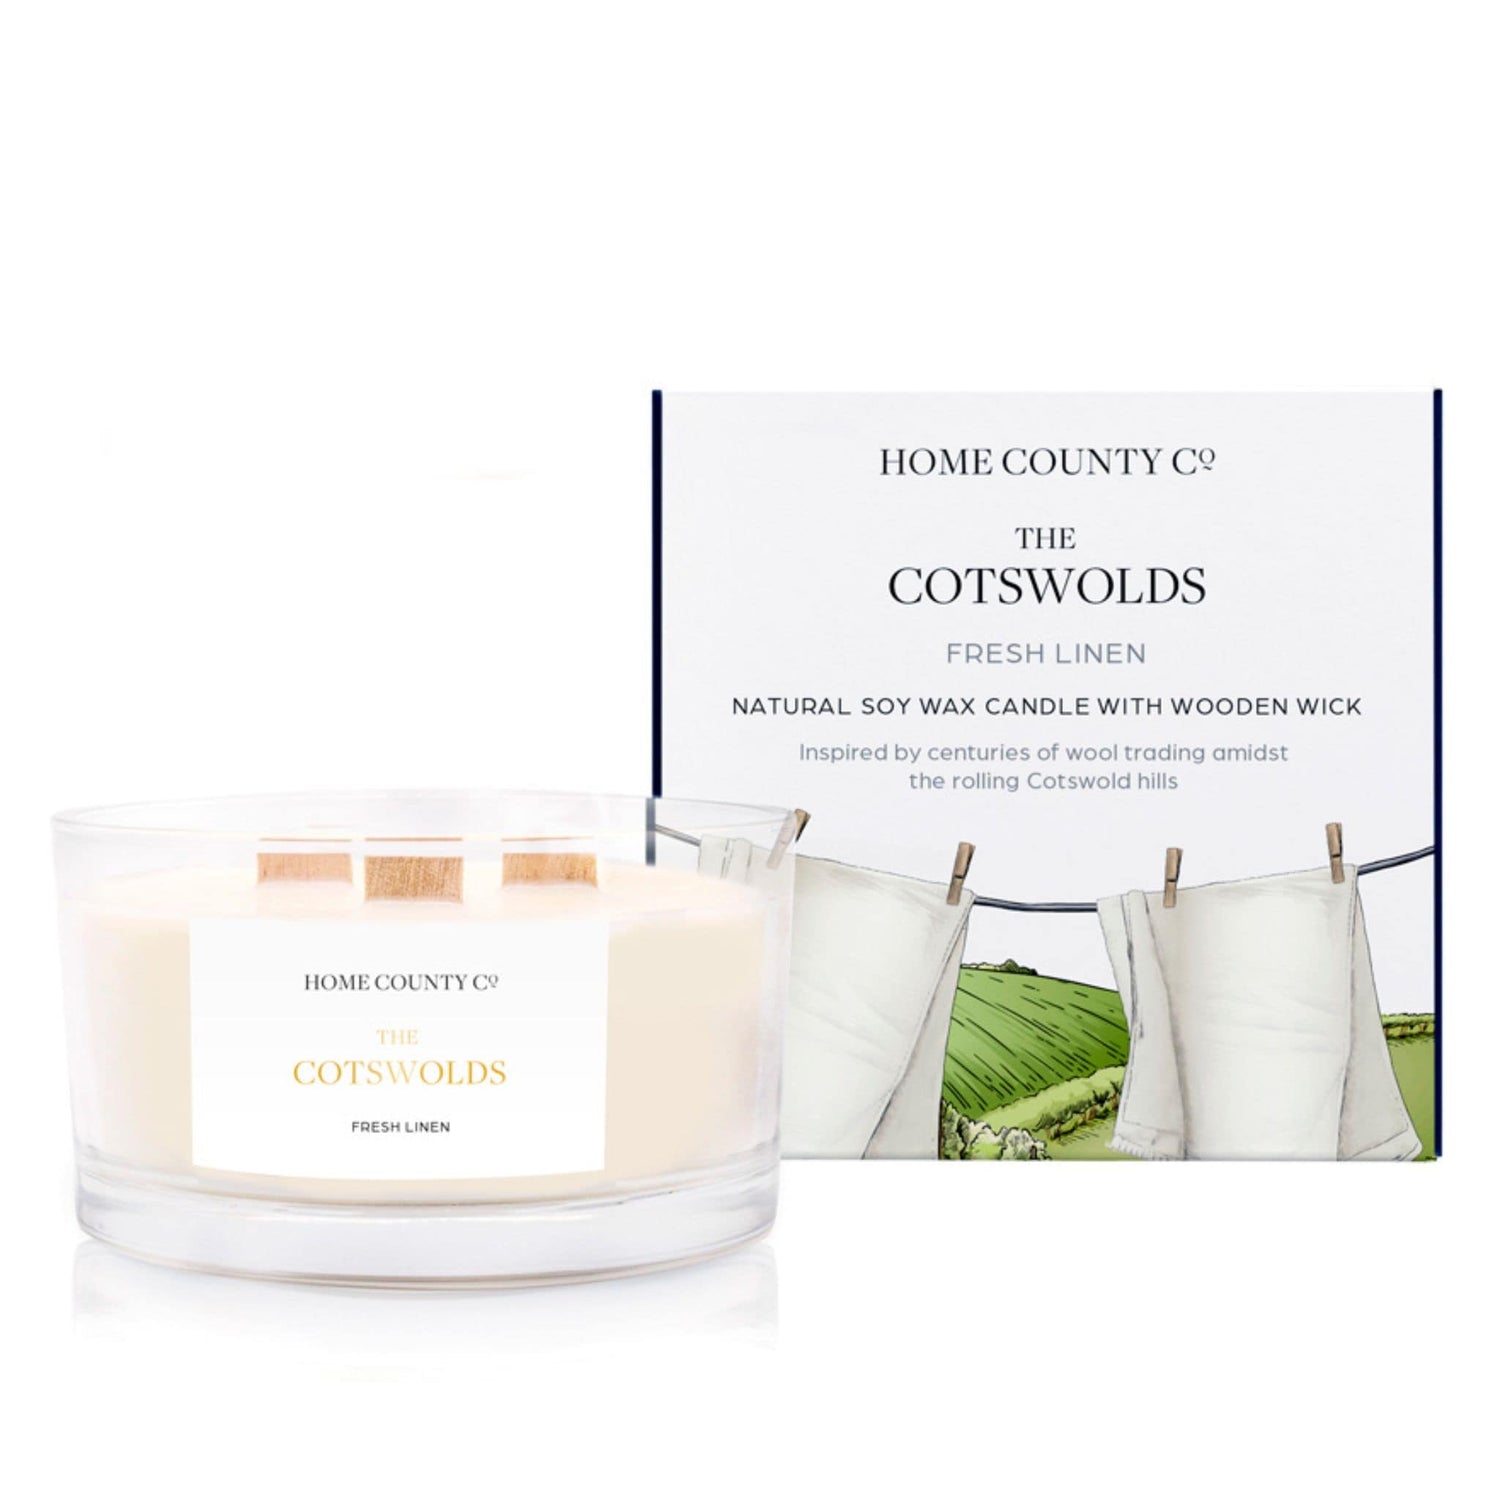 A fresh linen scented 3 wick candle from the Home County Co. is shown next to its eco-friendly candle packaging box. 